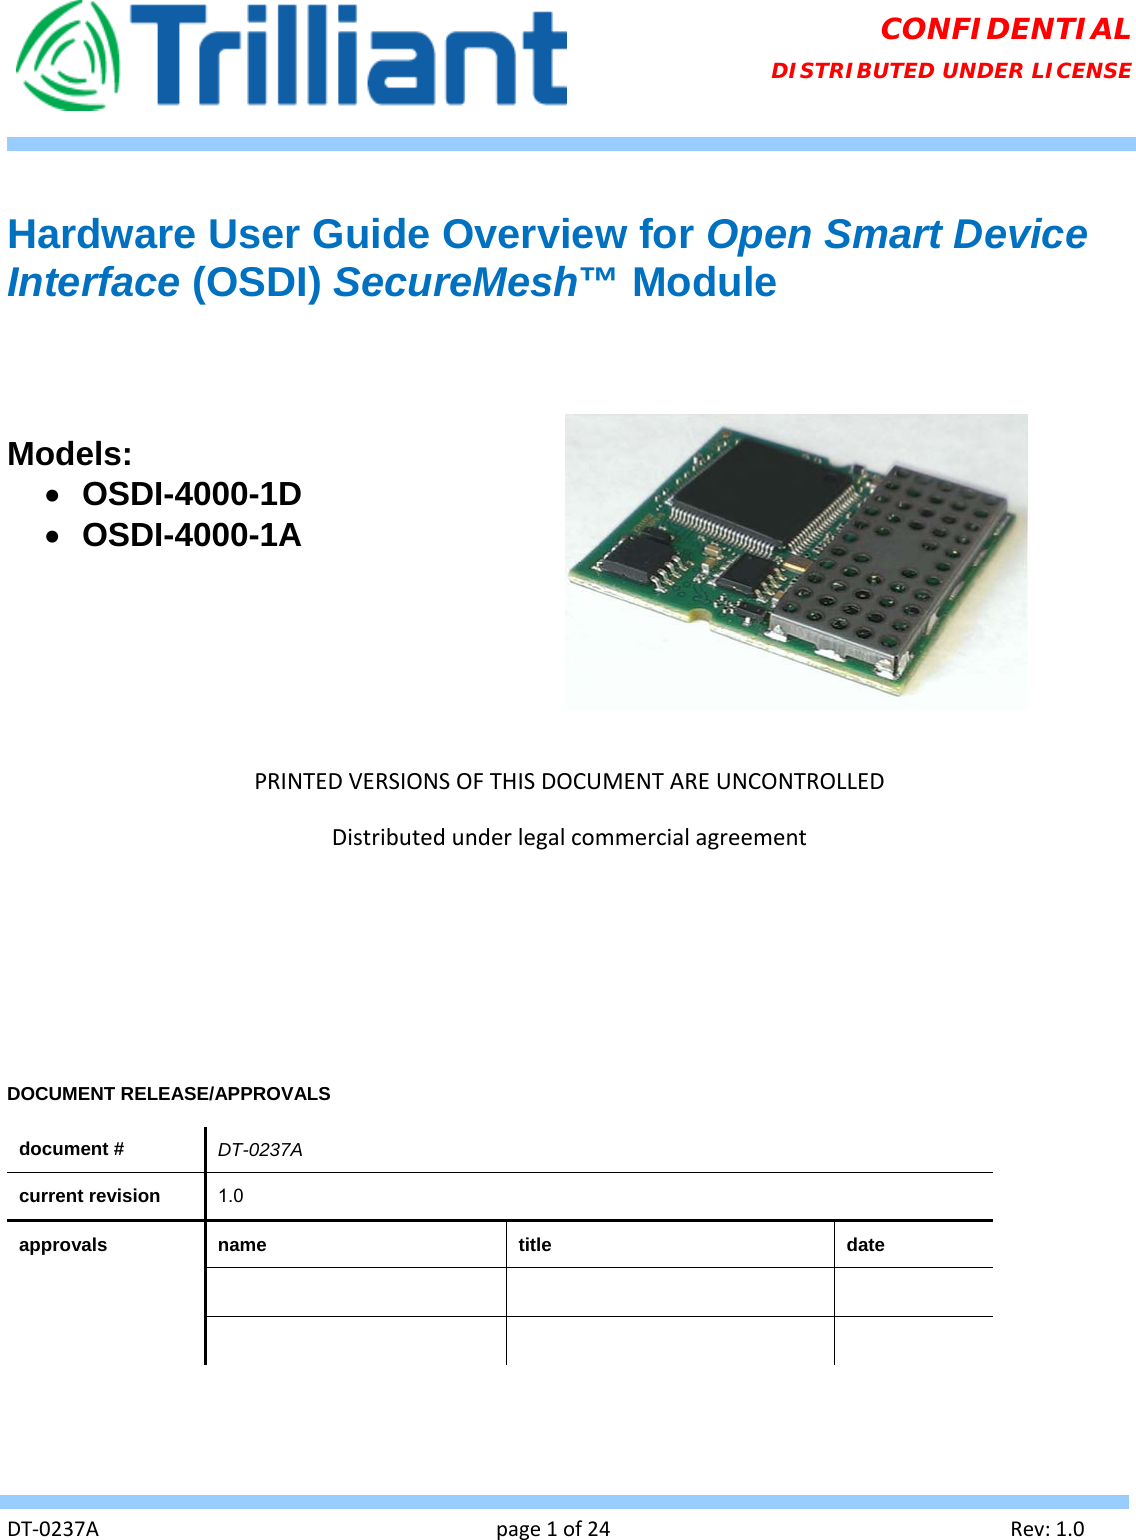   DT‐0237Apage1of24Rev:1.0CONFIDENTIAL DISTRIBUTED UNDER LICENSE  Hardware User Guide Overview for Open Smart Device Interface (OSDI) SecureMesh™ Module    Models:   OSDI-4000-1D  OSDI-4000-1A PRINTEDVERSIONSOFTHISDOCUMENTAREUNCONTROLLEDDistributedunderlegalcommercialagreementDOCUMENT RELEASE/APPROVALS  document #  DT-0237A current revision  1.0 approvals name  title date          